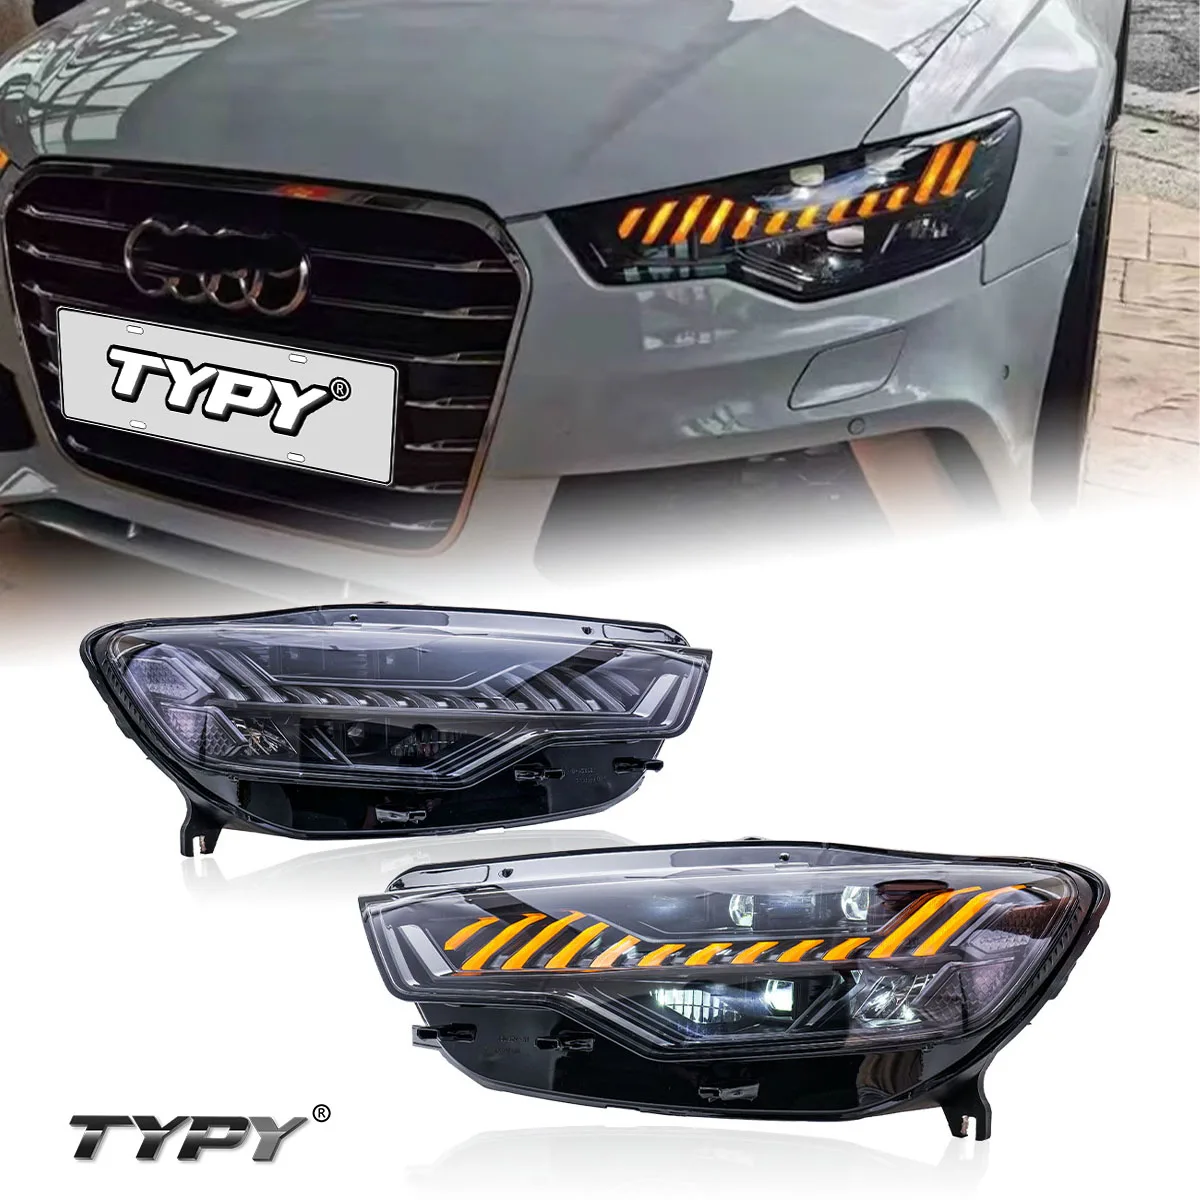 

TYPY Original Wholesale Price Auto Headlight Assembly For Audi A6 2012-2015 Upgrade Modified Dynamic Turn Signal LED Taillight